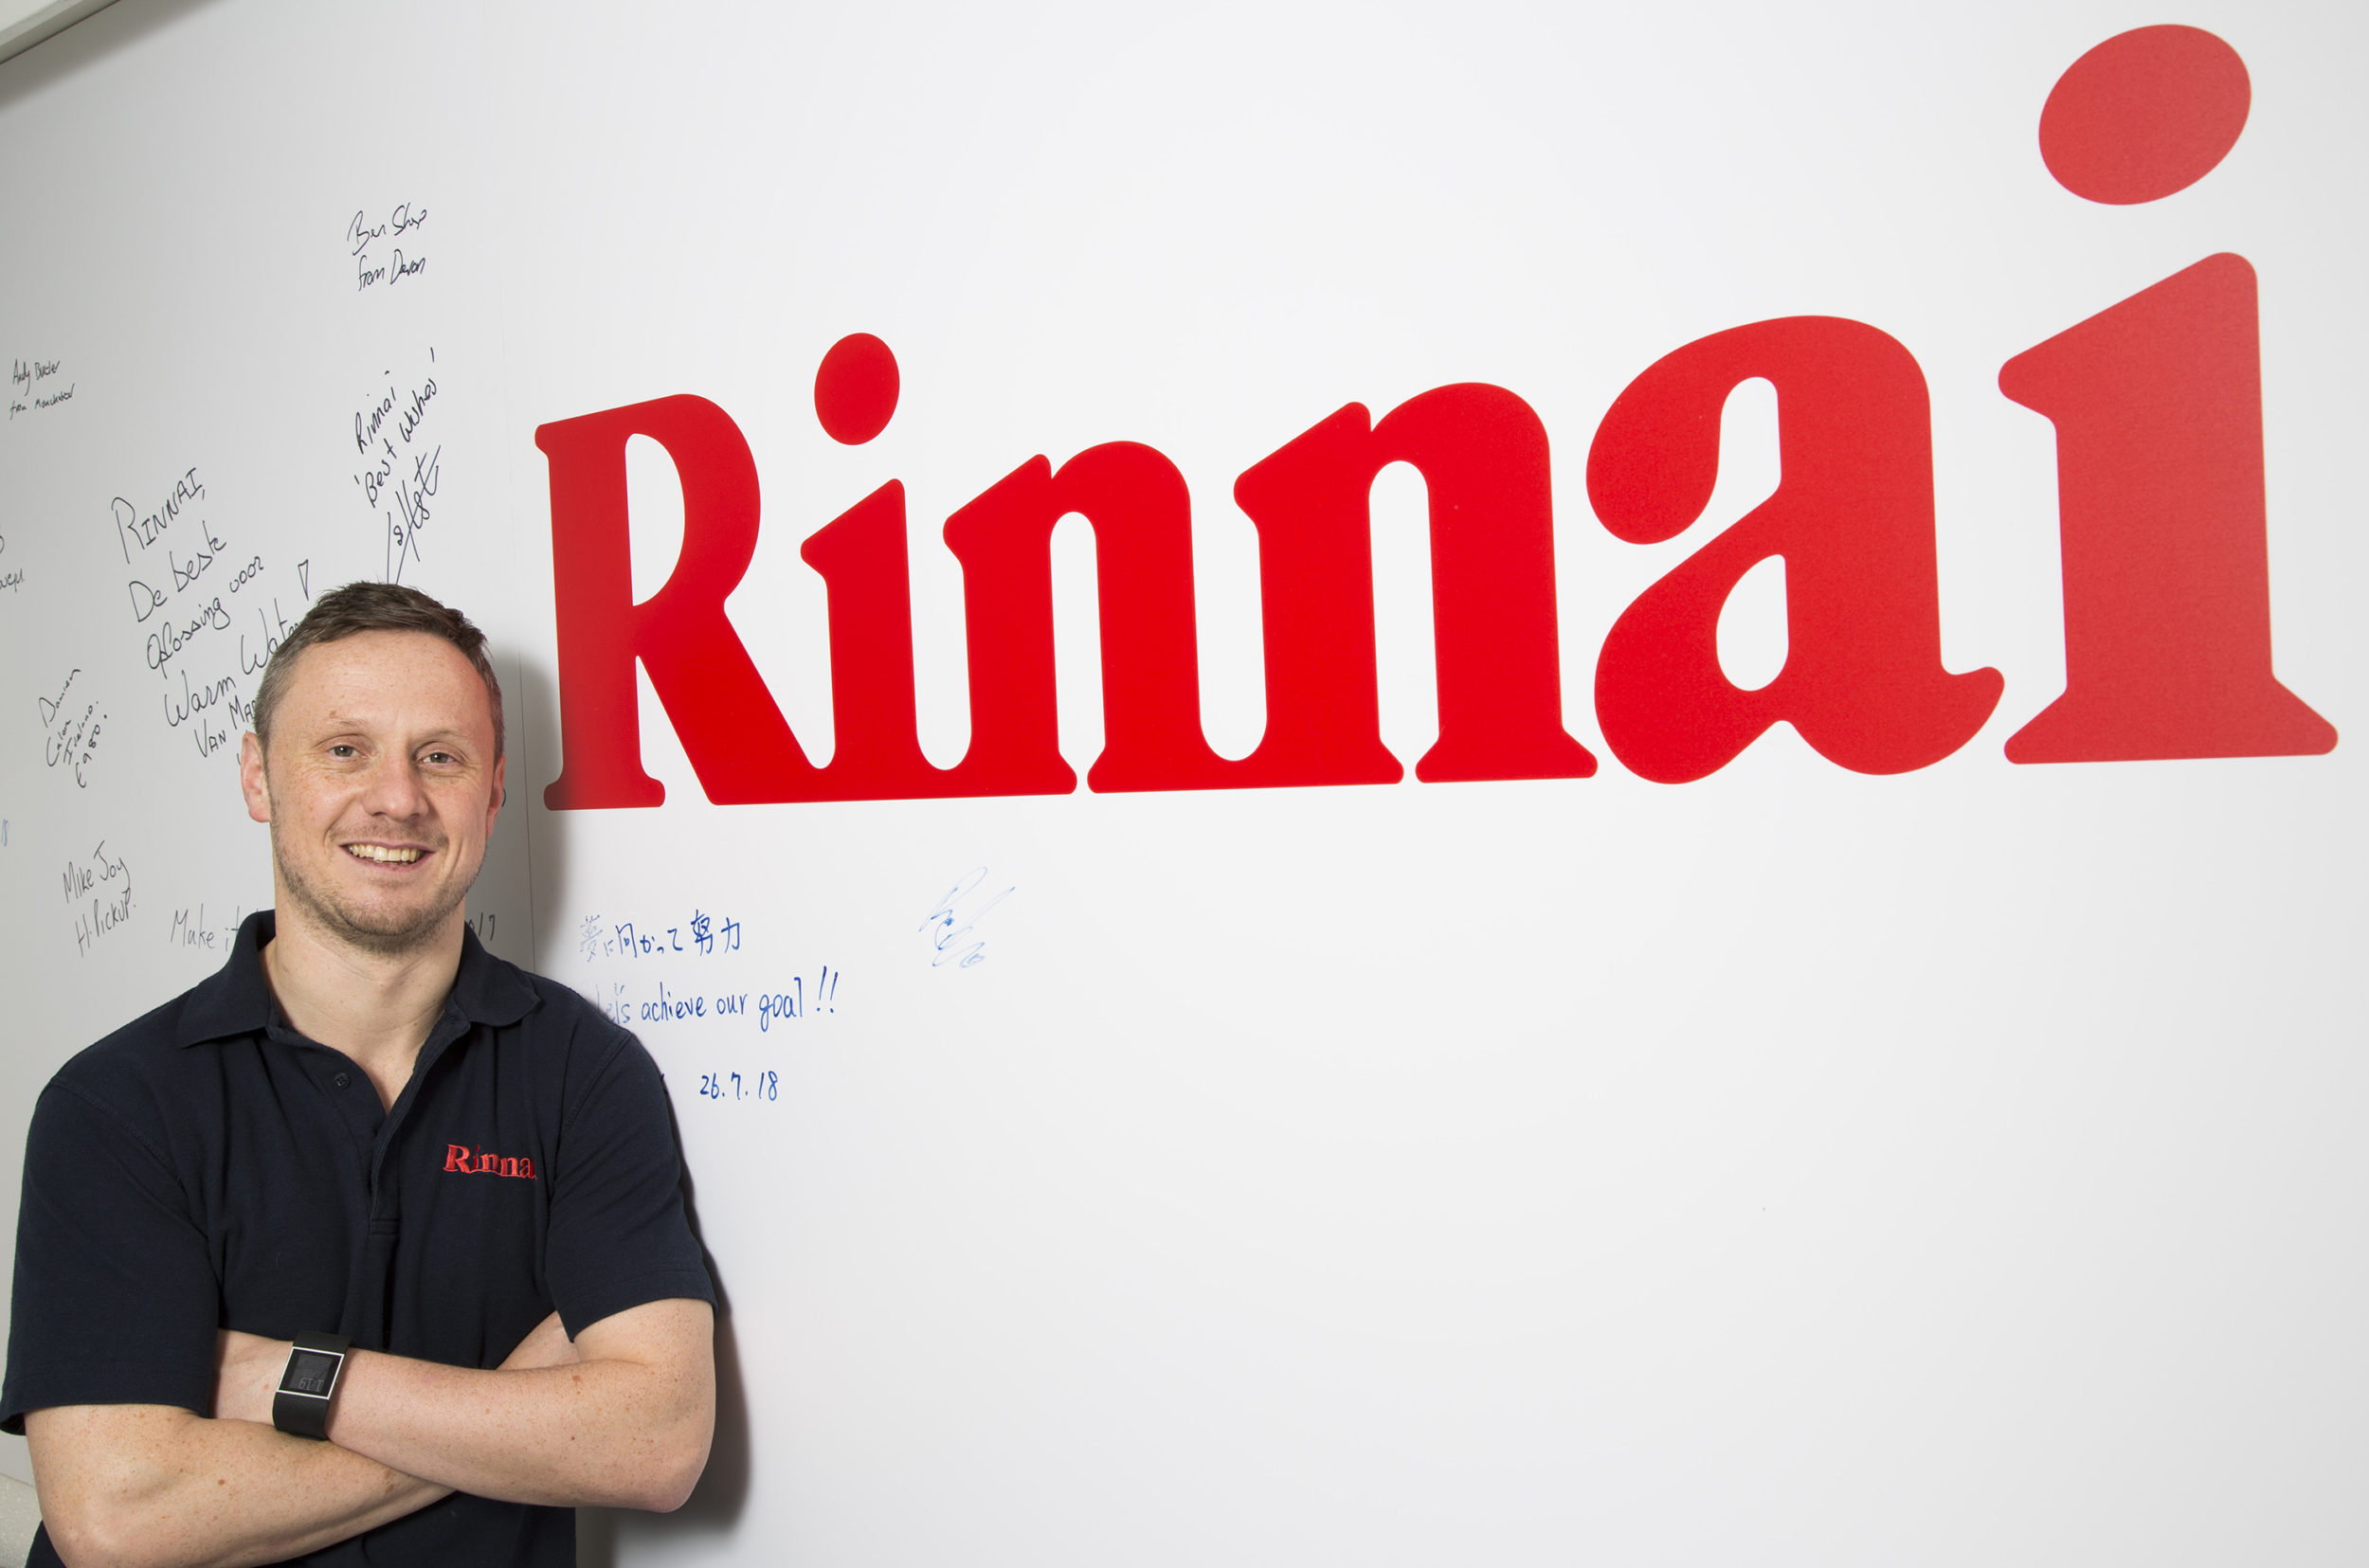 Installer 2019:  Rinnai to unveil re-imagined home heating and hot water system